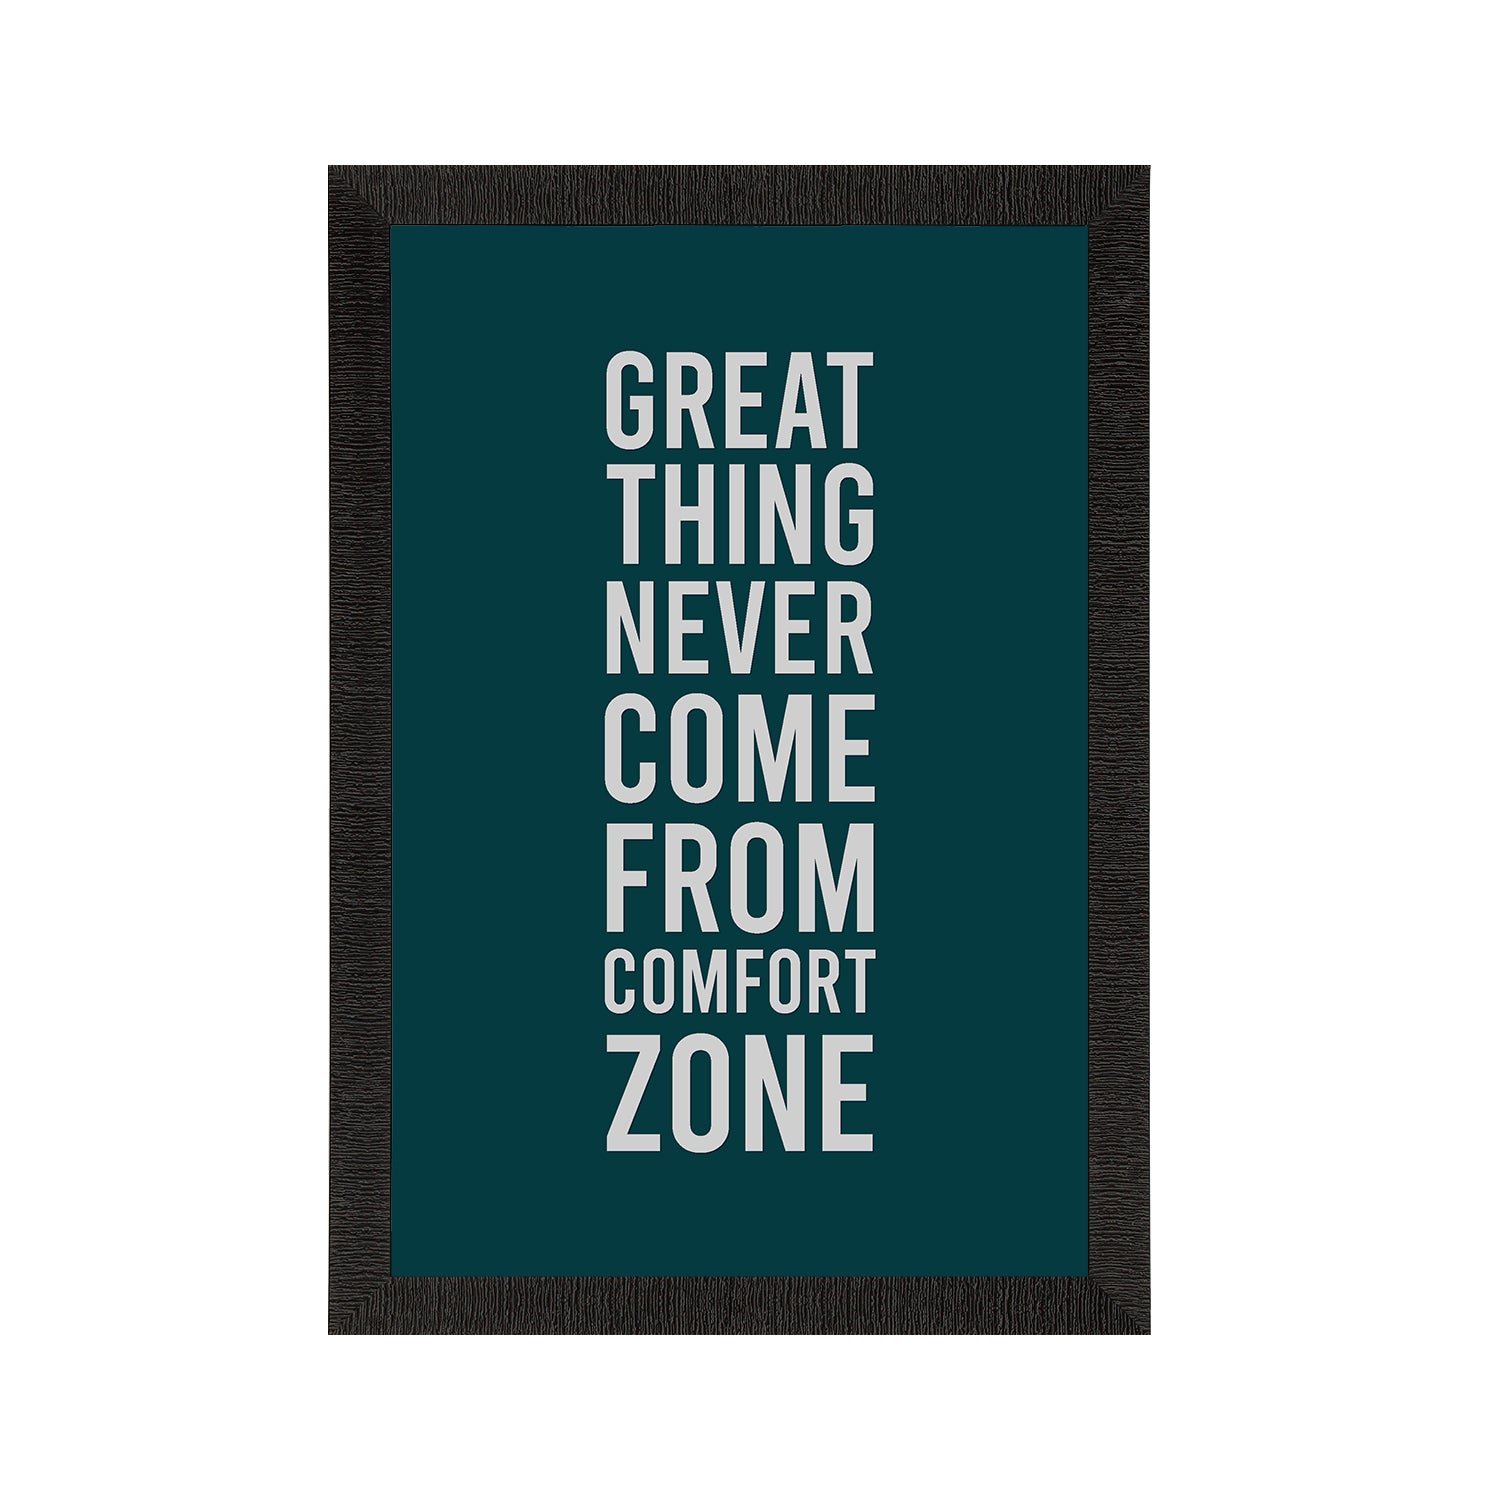 "Great thing never come from comfort zone" Motivational Quote Satin Matt Texture UV Art Painting